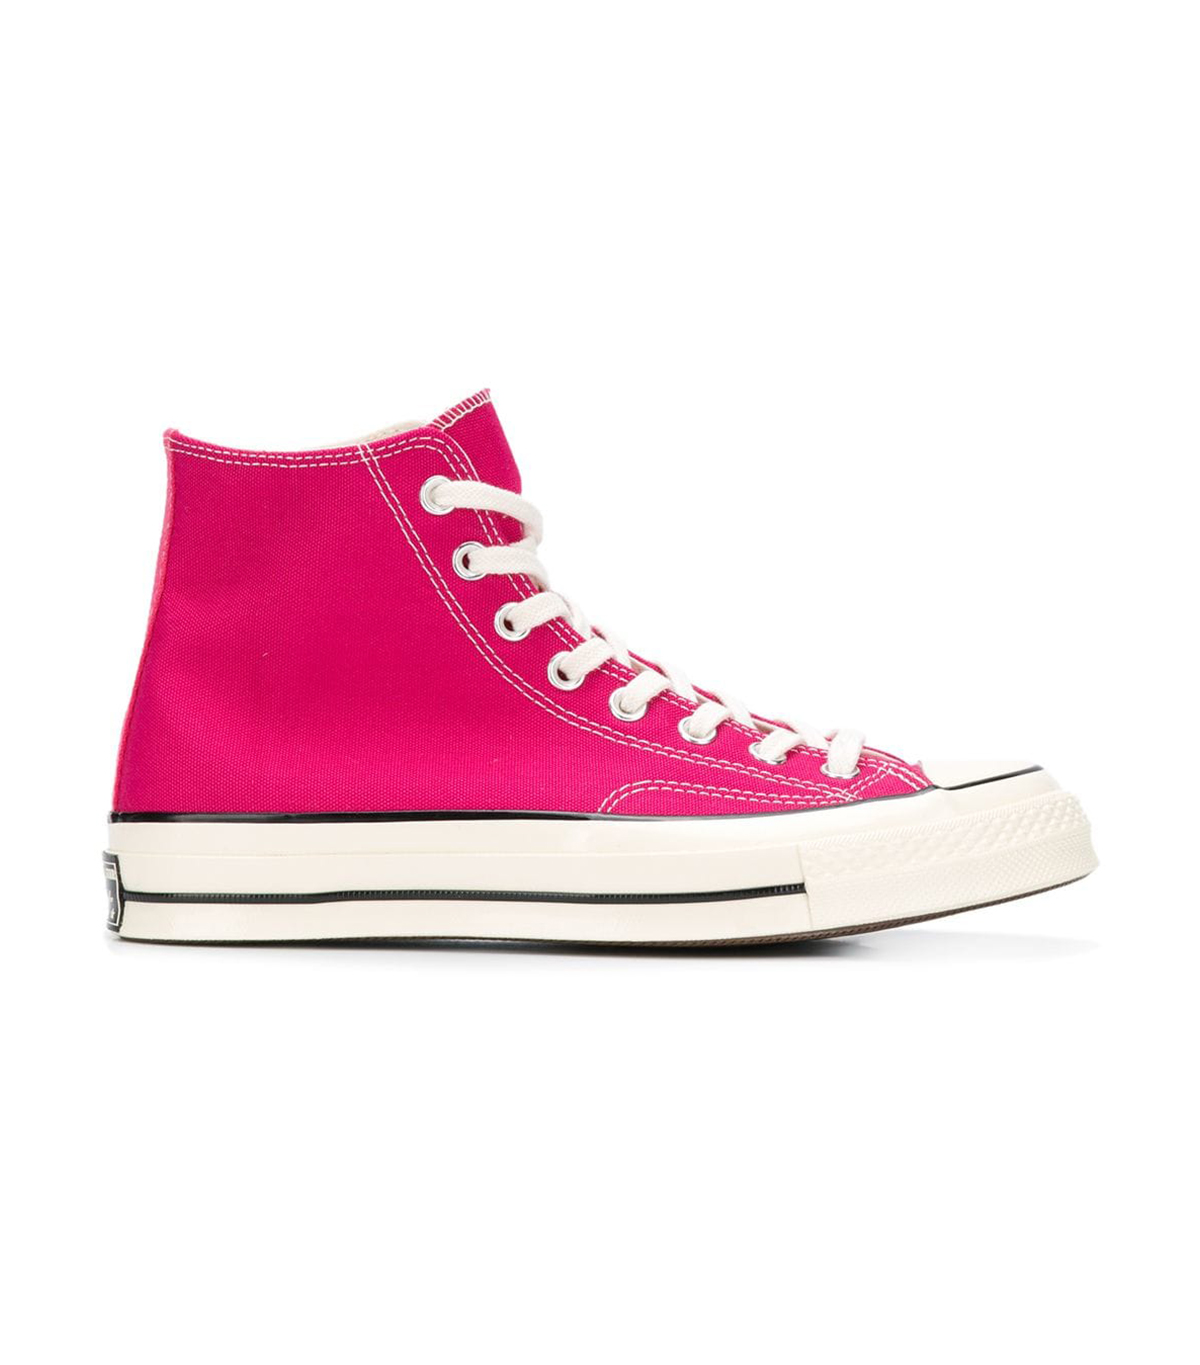 pink converse style shoes